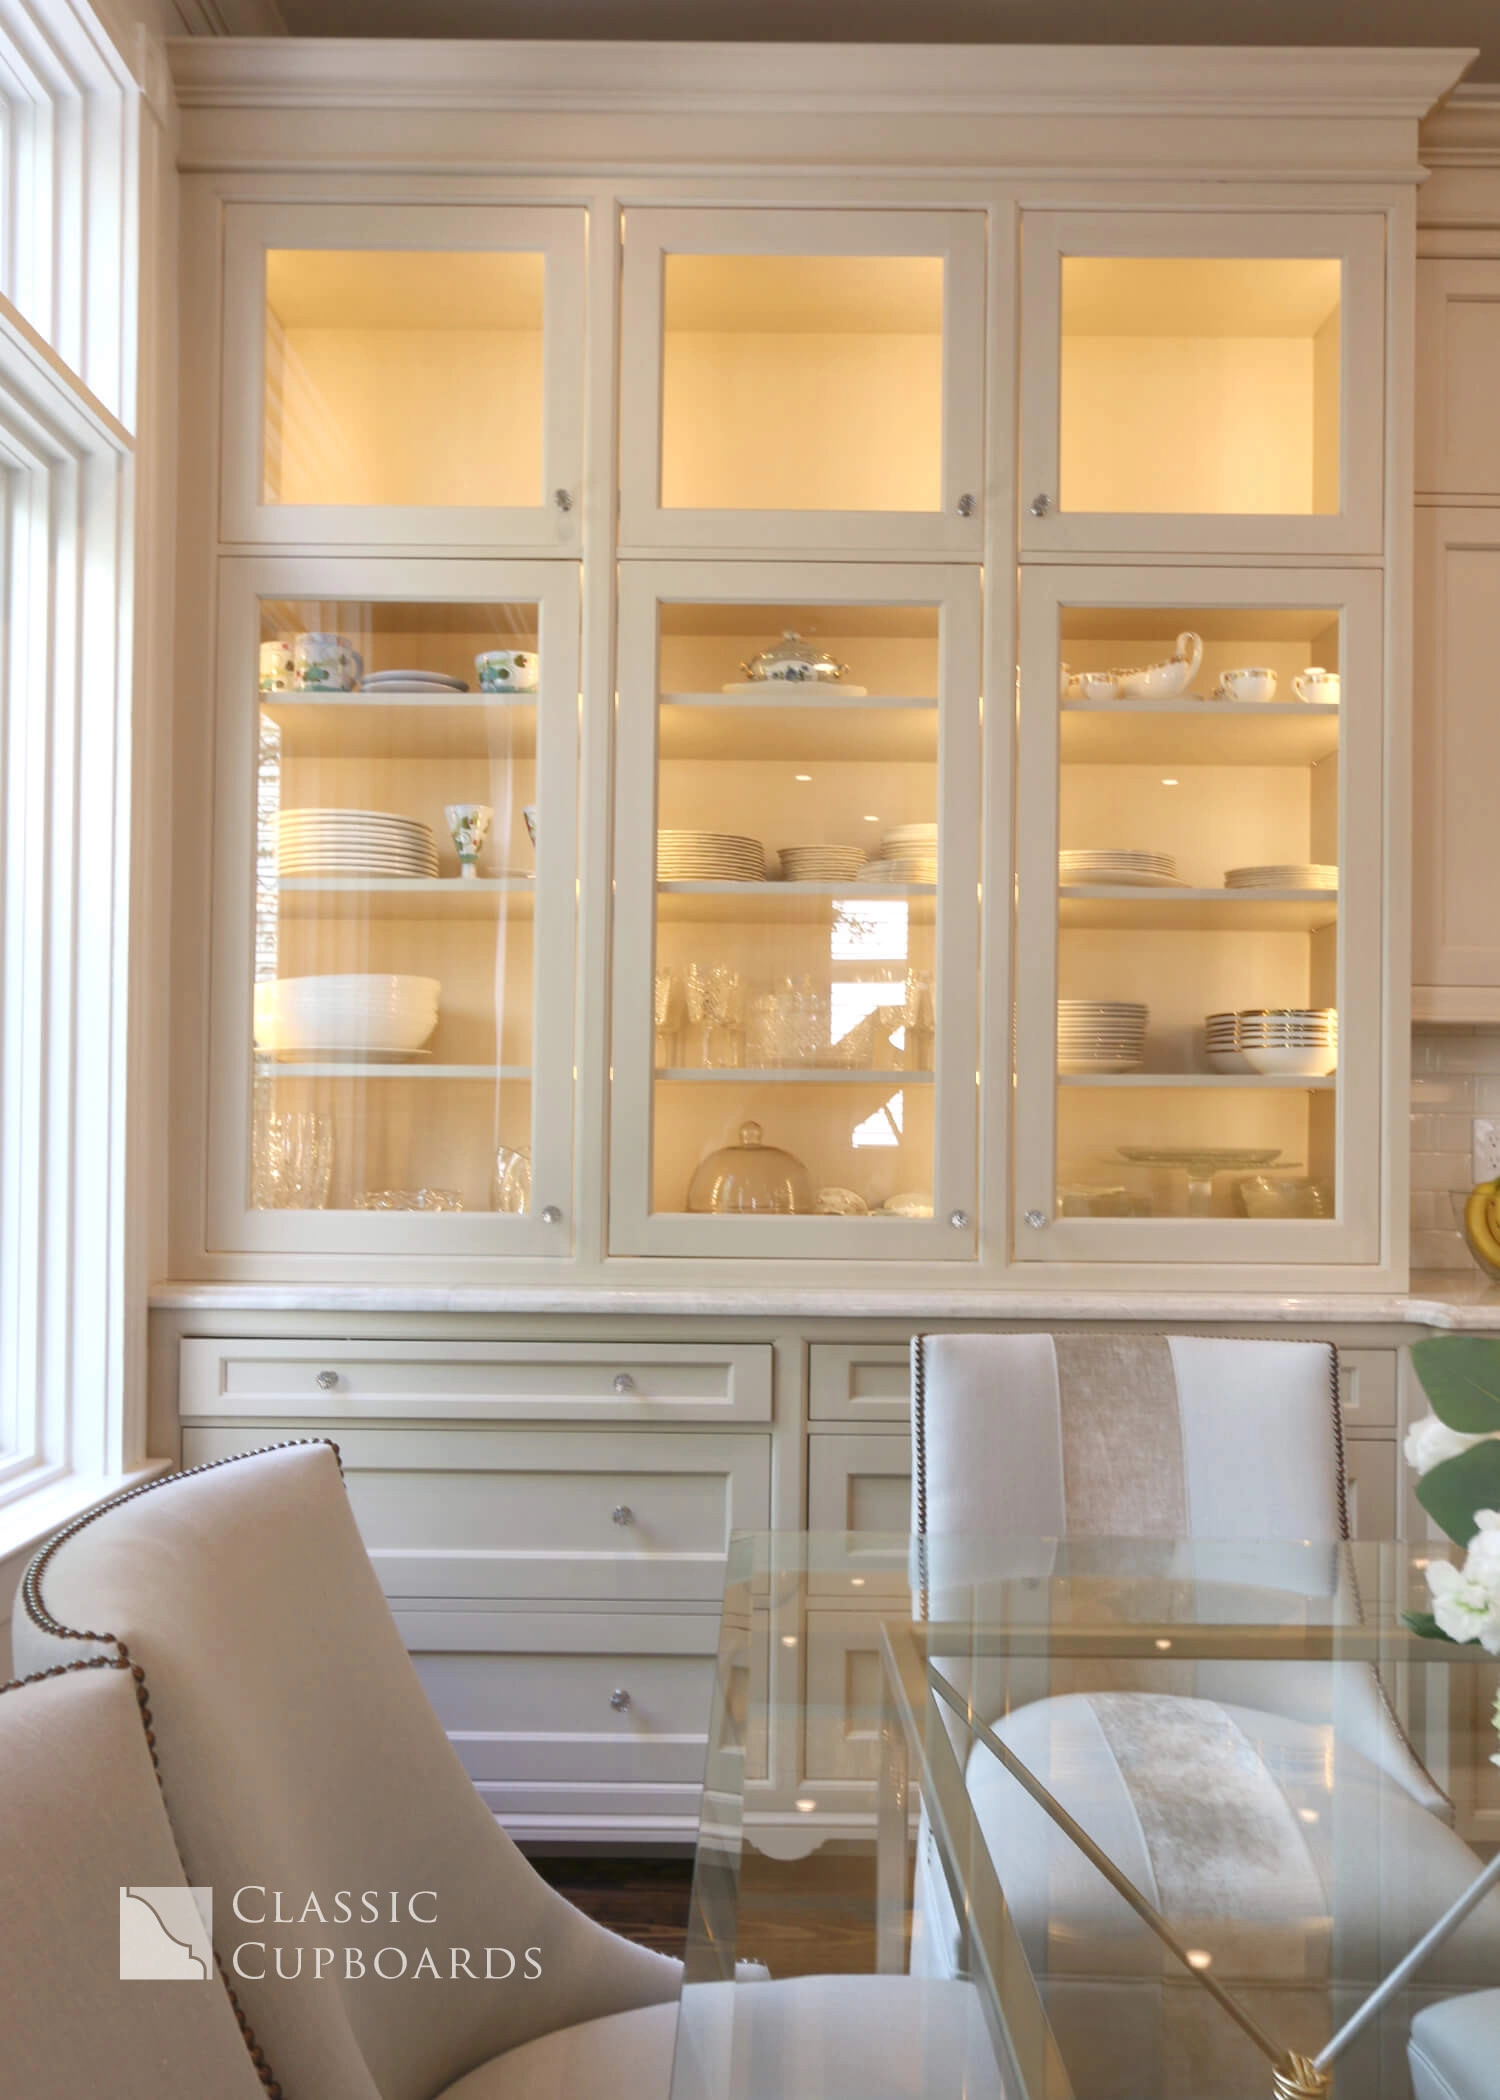 traditional style cabinetry with lighting